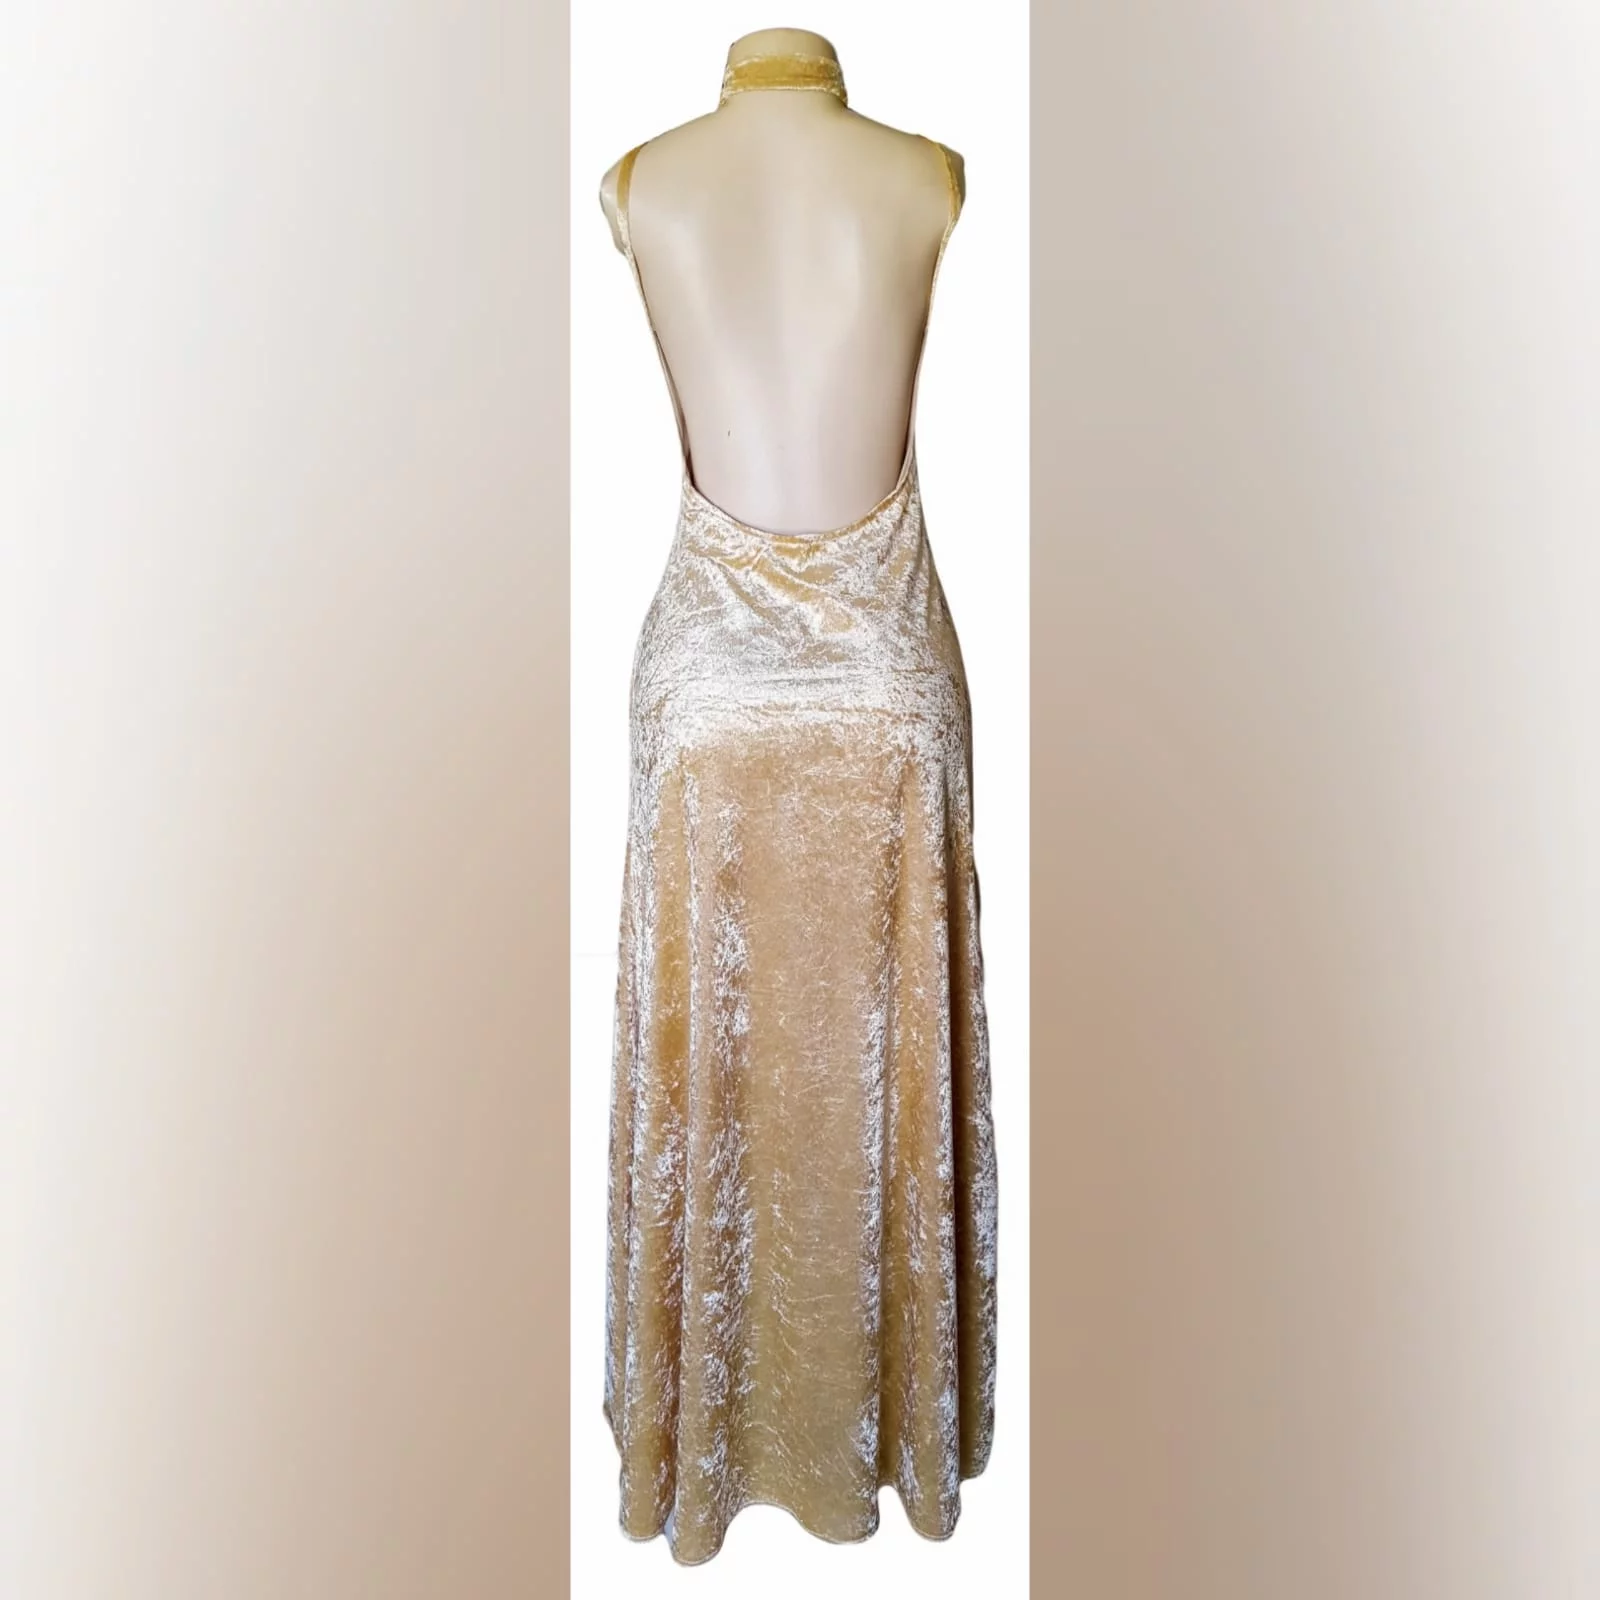 Champagne velvet long prom dress 4 champagne velvet long prom dress with a v neckline, rounded backless design with a high slit and a matching choker.